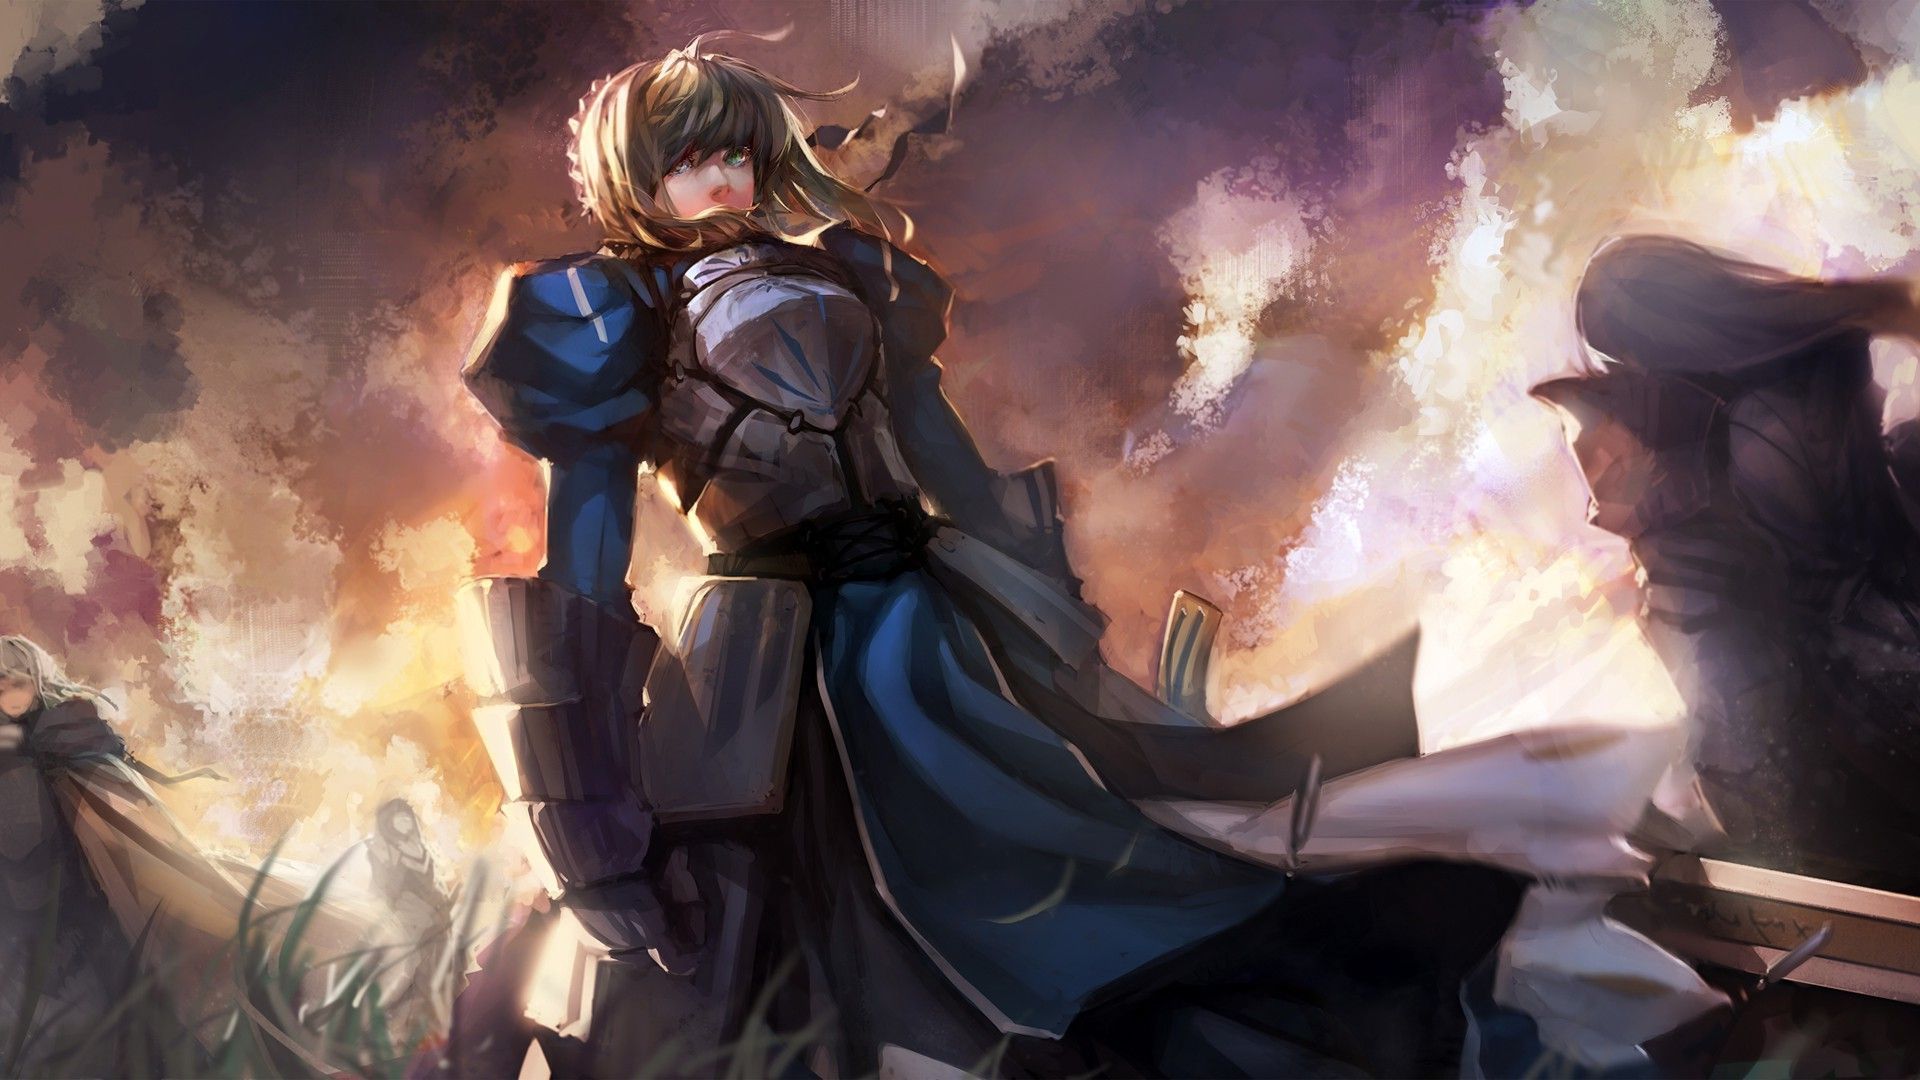 Saber   Fate stay night wallpaper 14364 1920x1080